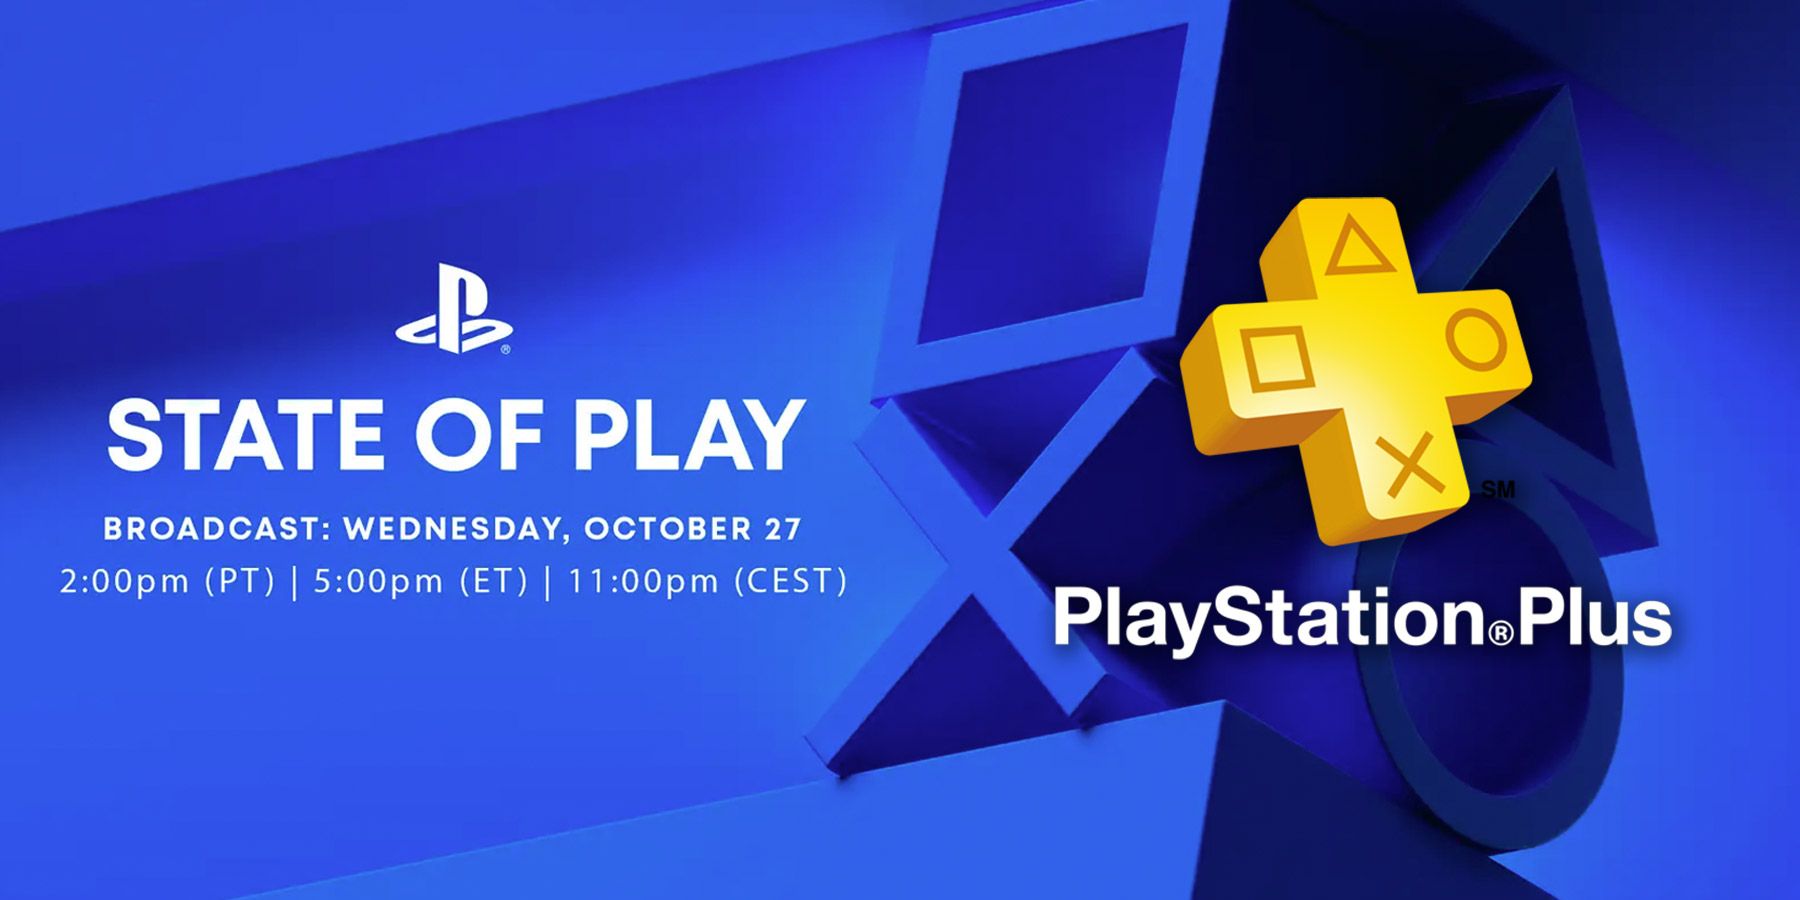 PlayStation State of Play Returns with PS4 & PS5 Games on October 27th